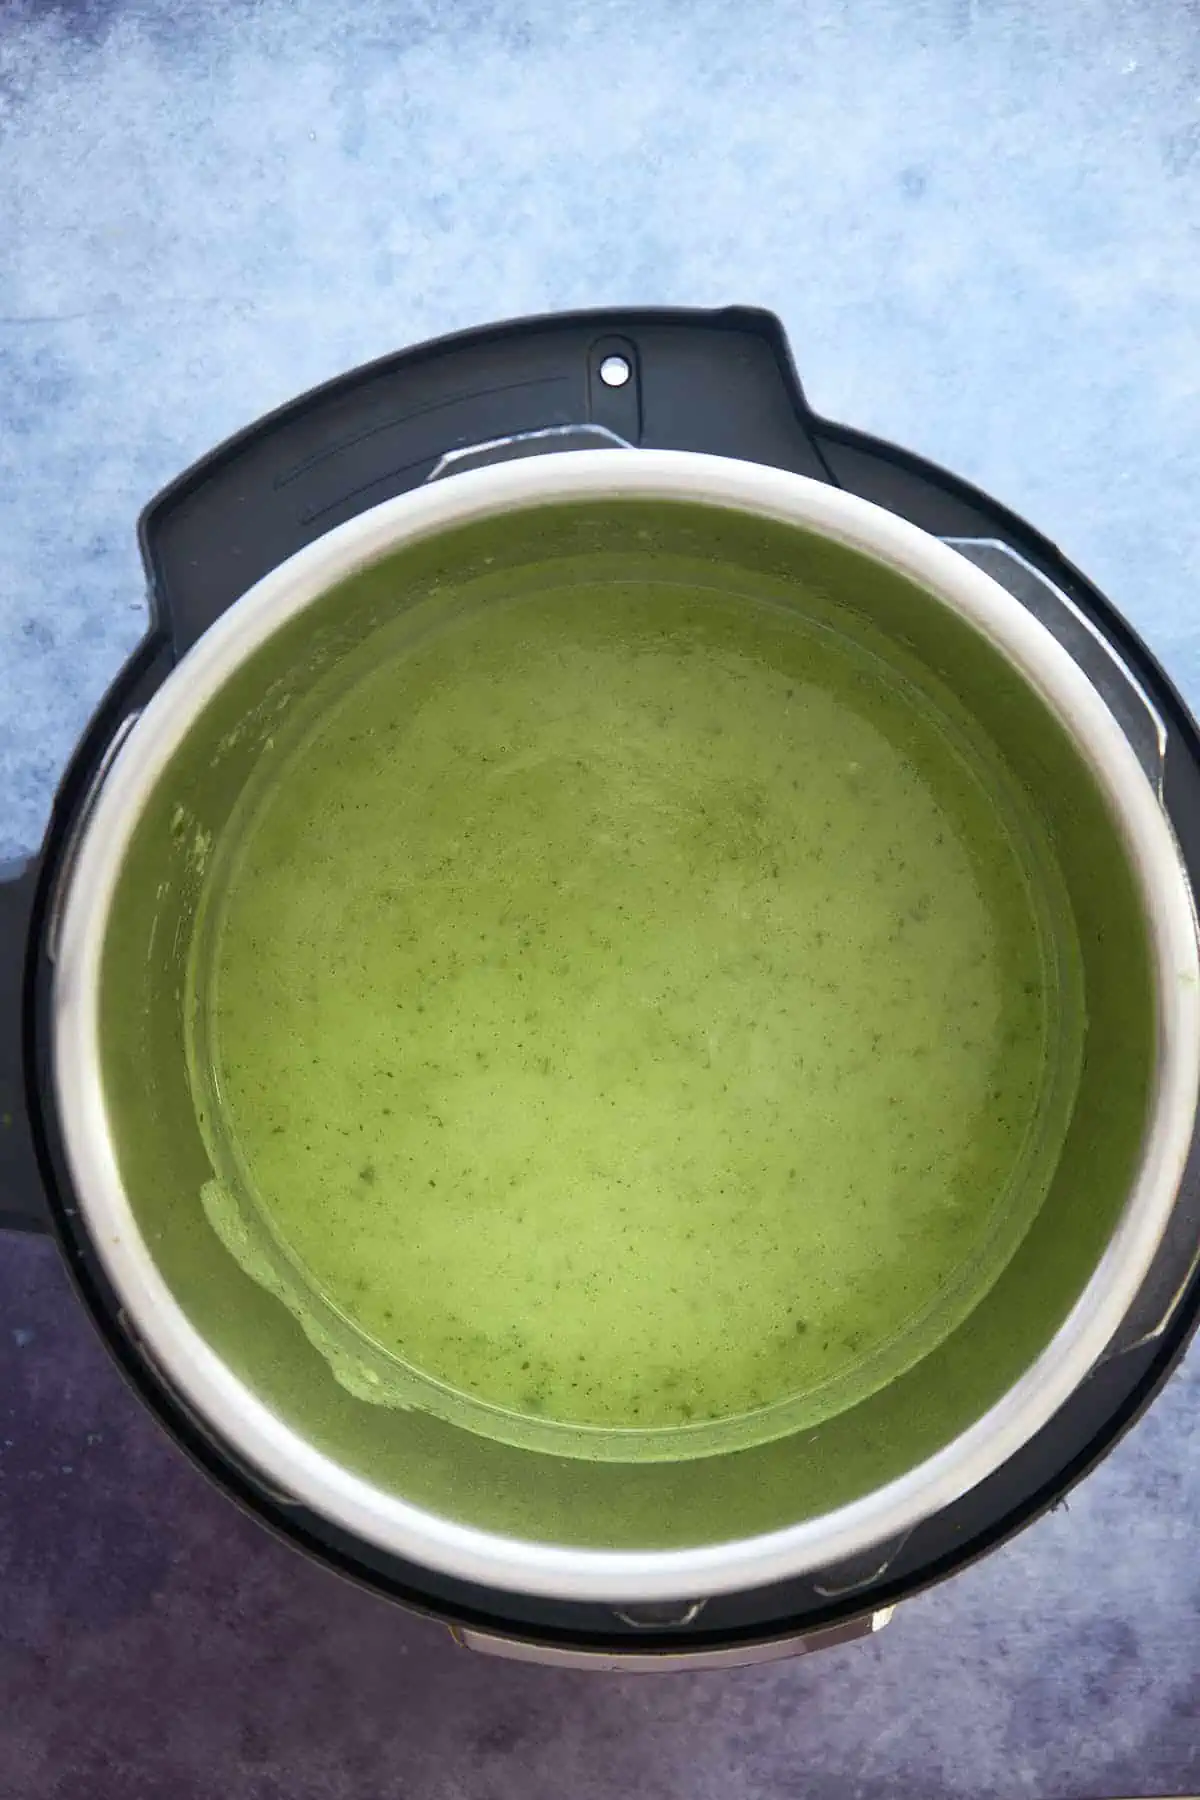 After blending the zucchini soup recipe and making the soup creamy inside the air fryer basket.